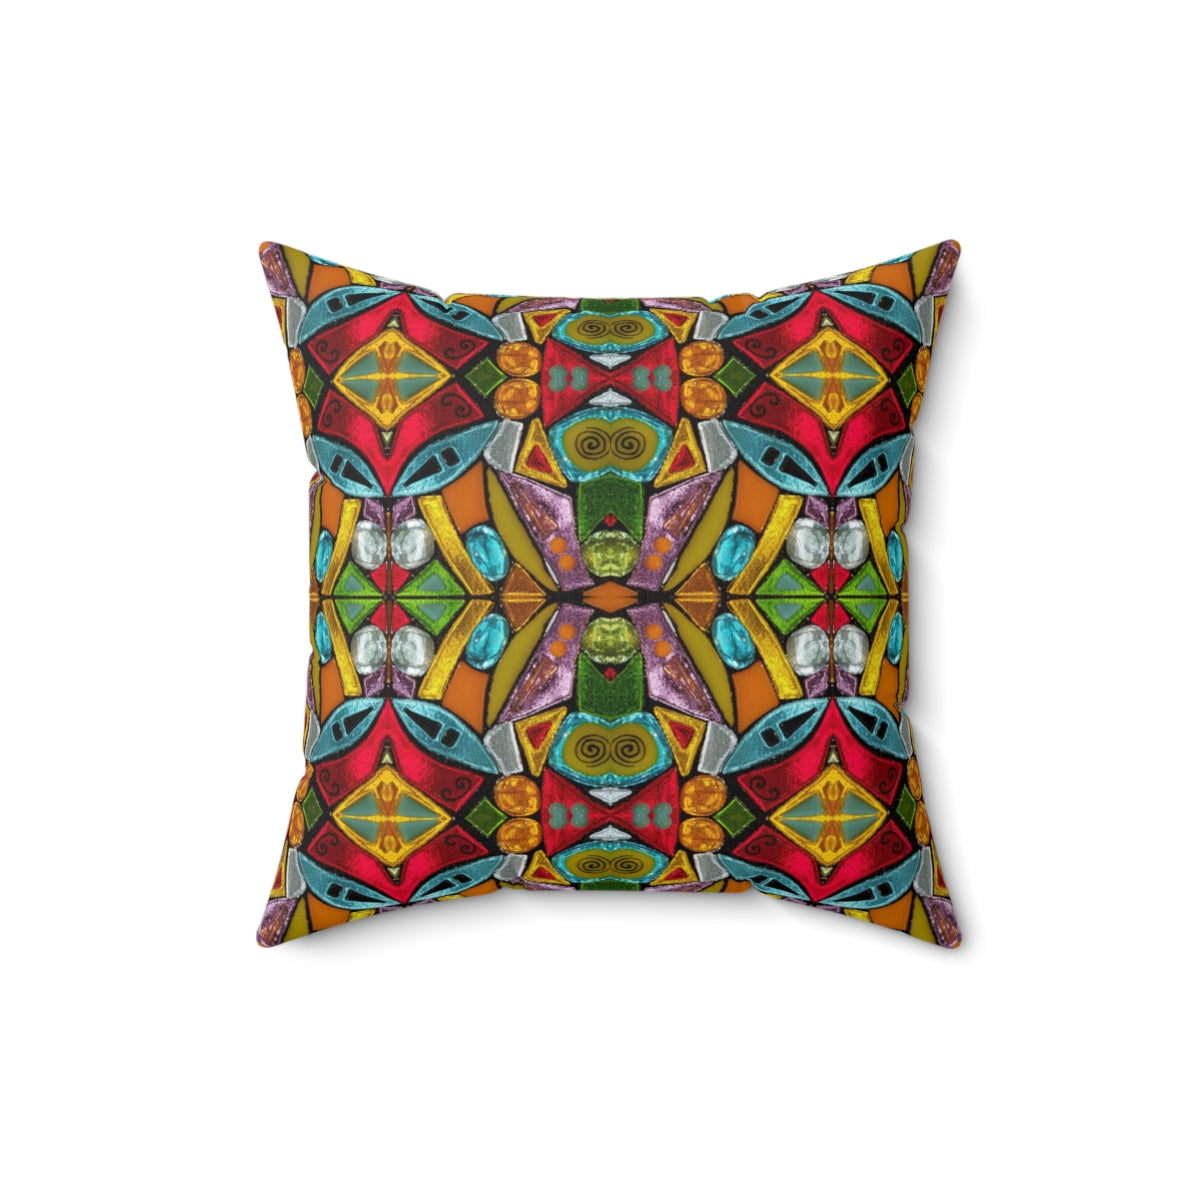 Cool Colorful throw pillows for the couch